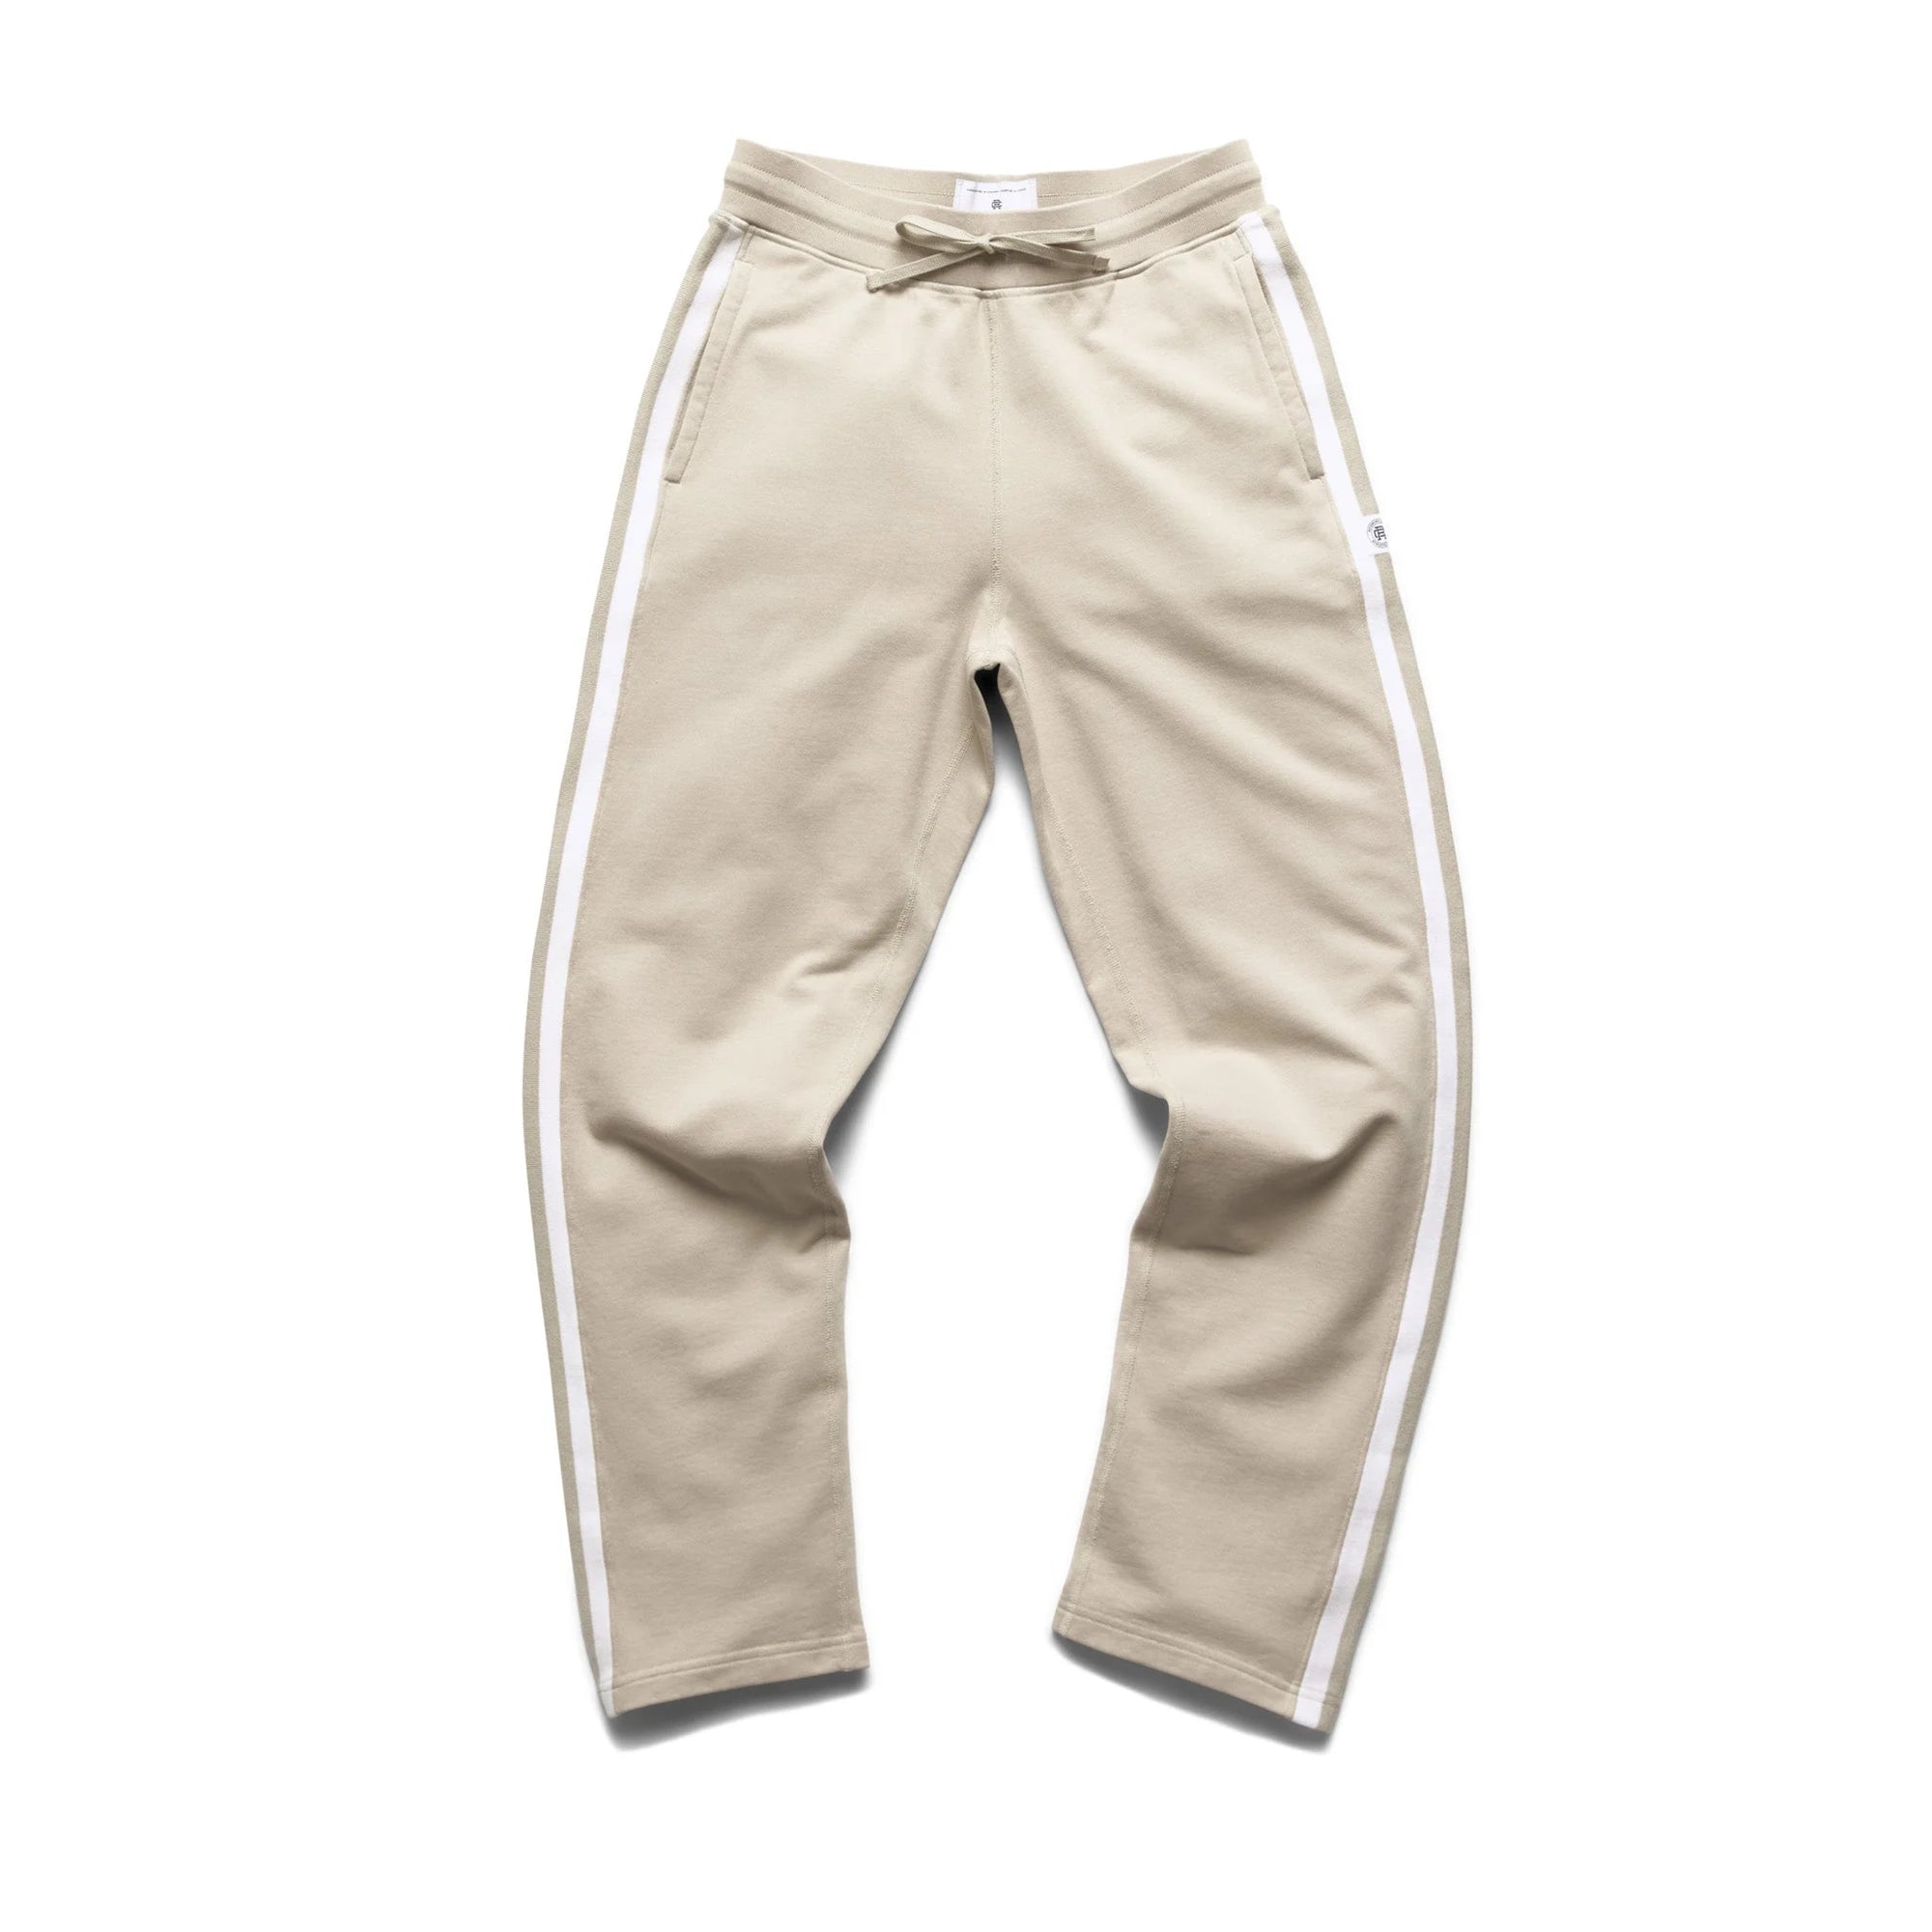 Reigning Champ Lightweight Terry Side Stripe Pant in Dune